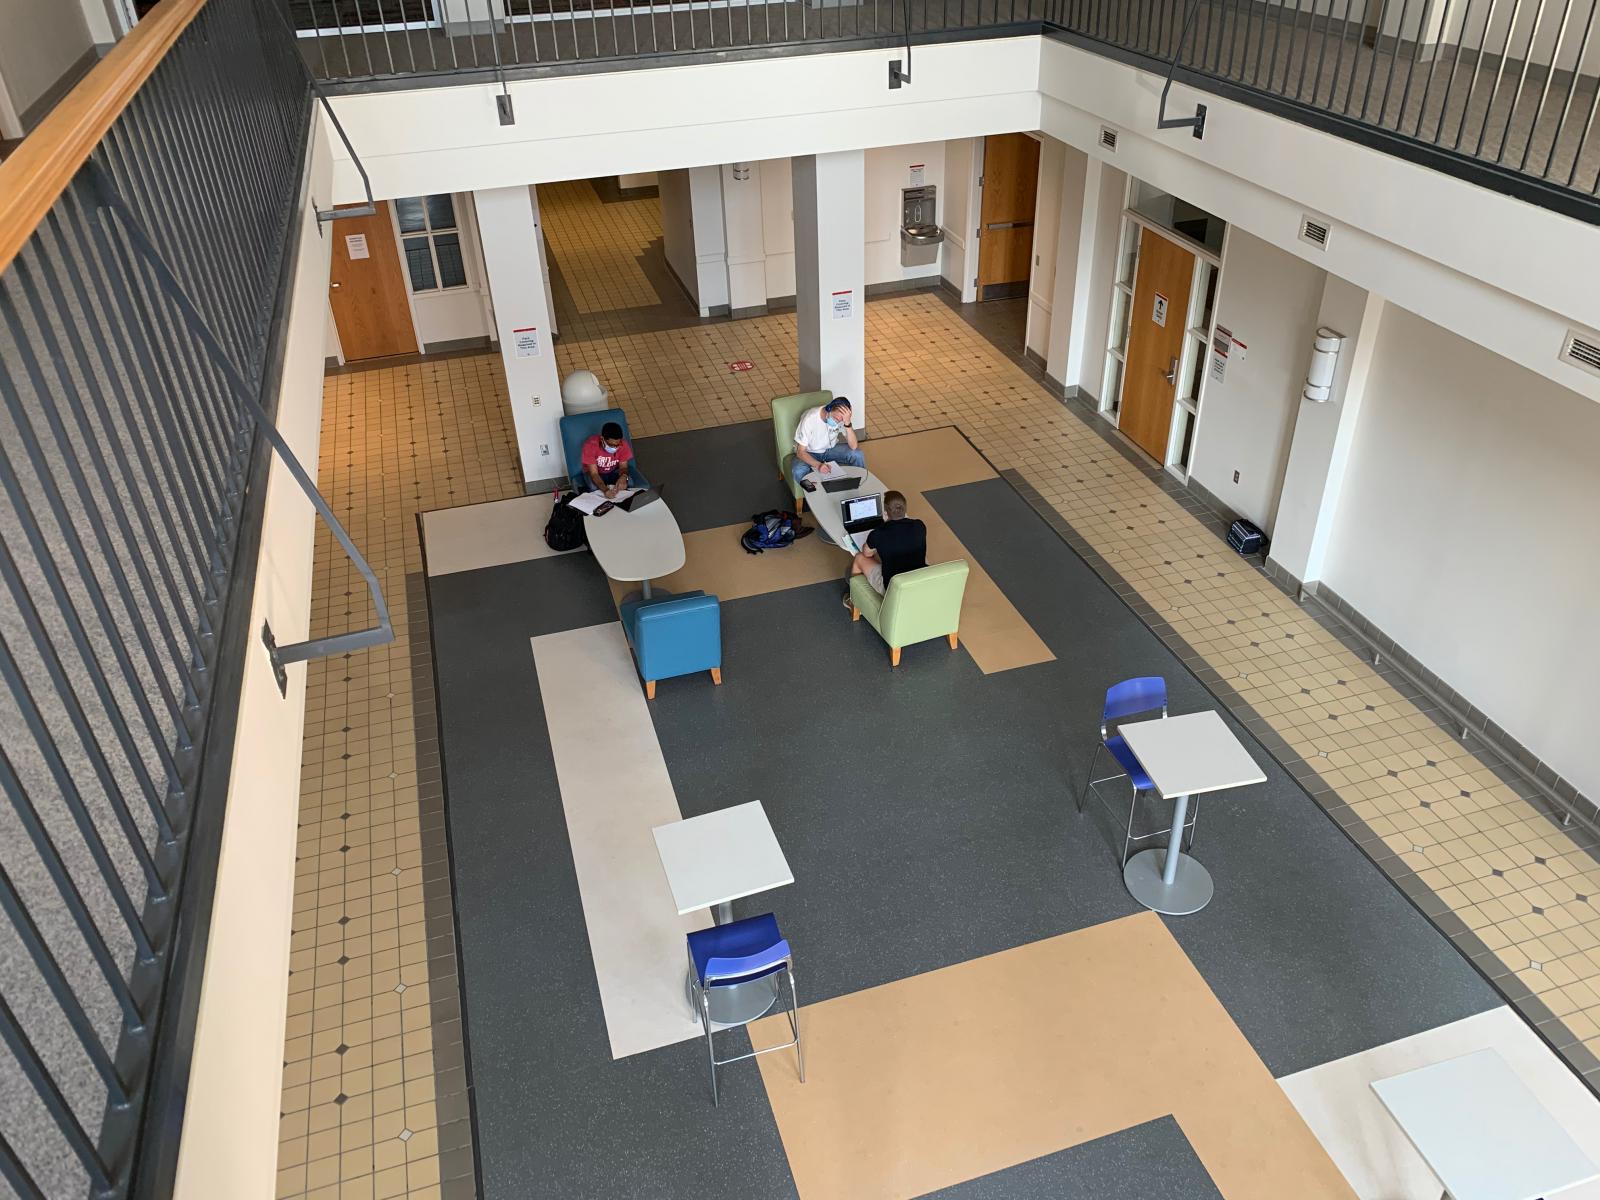 Louise Pound Hall, ground level lounge and study space.